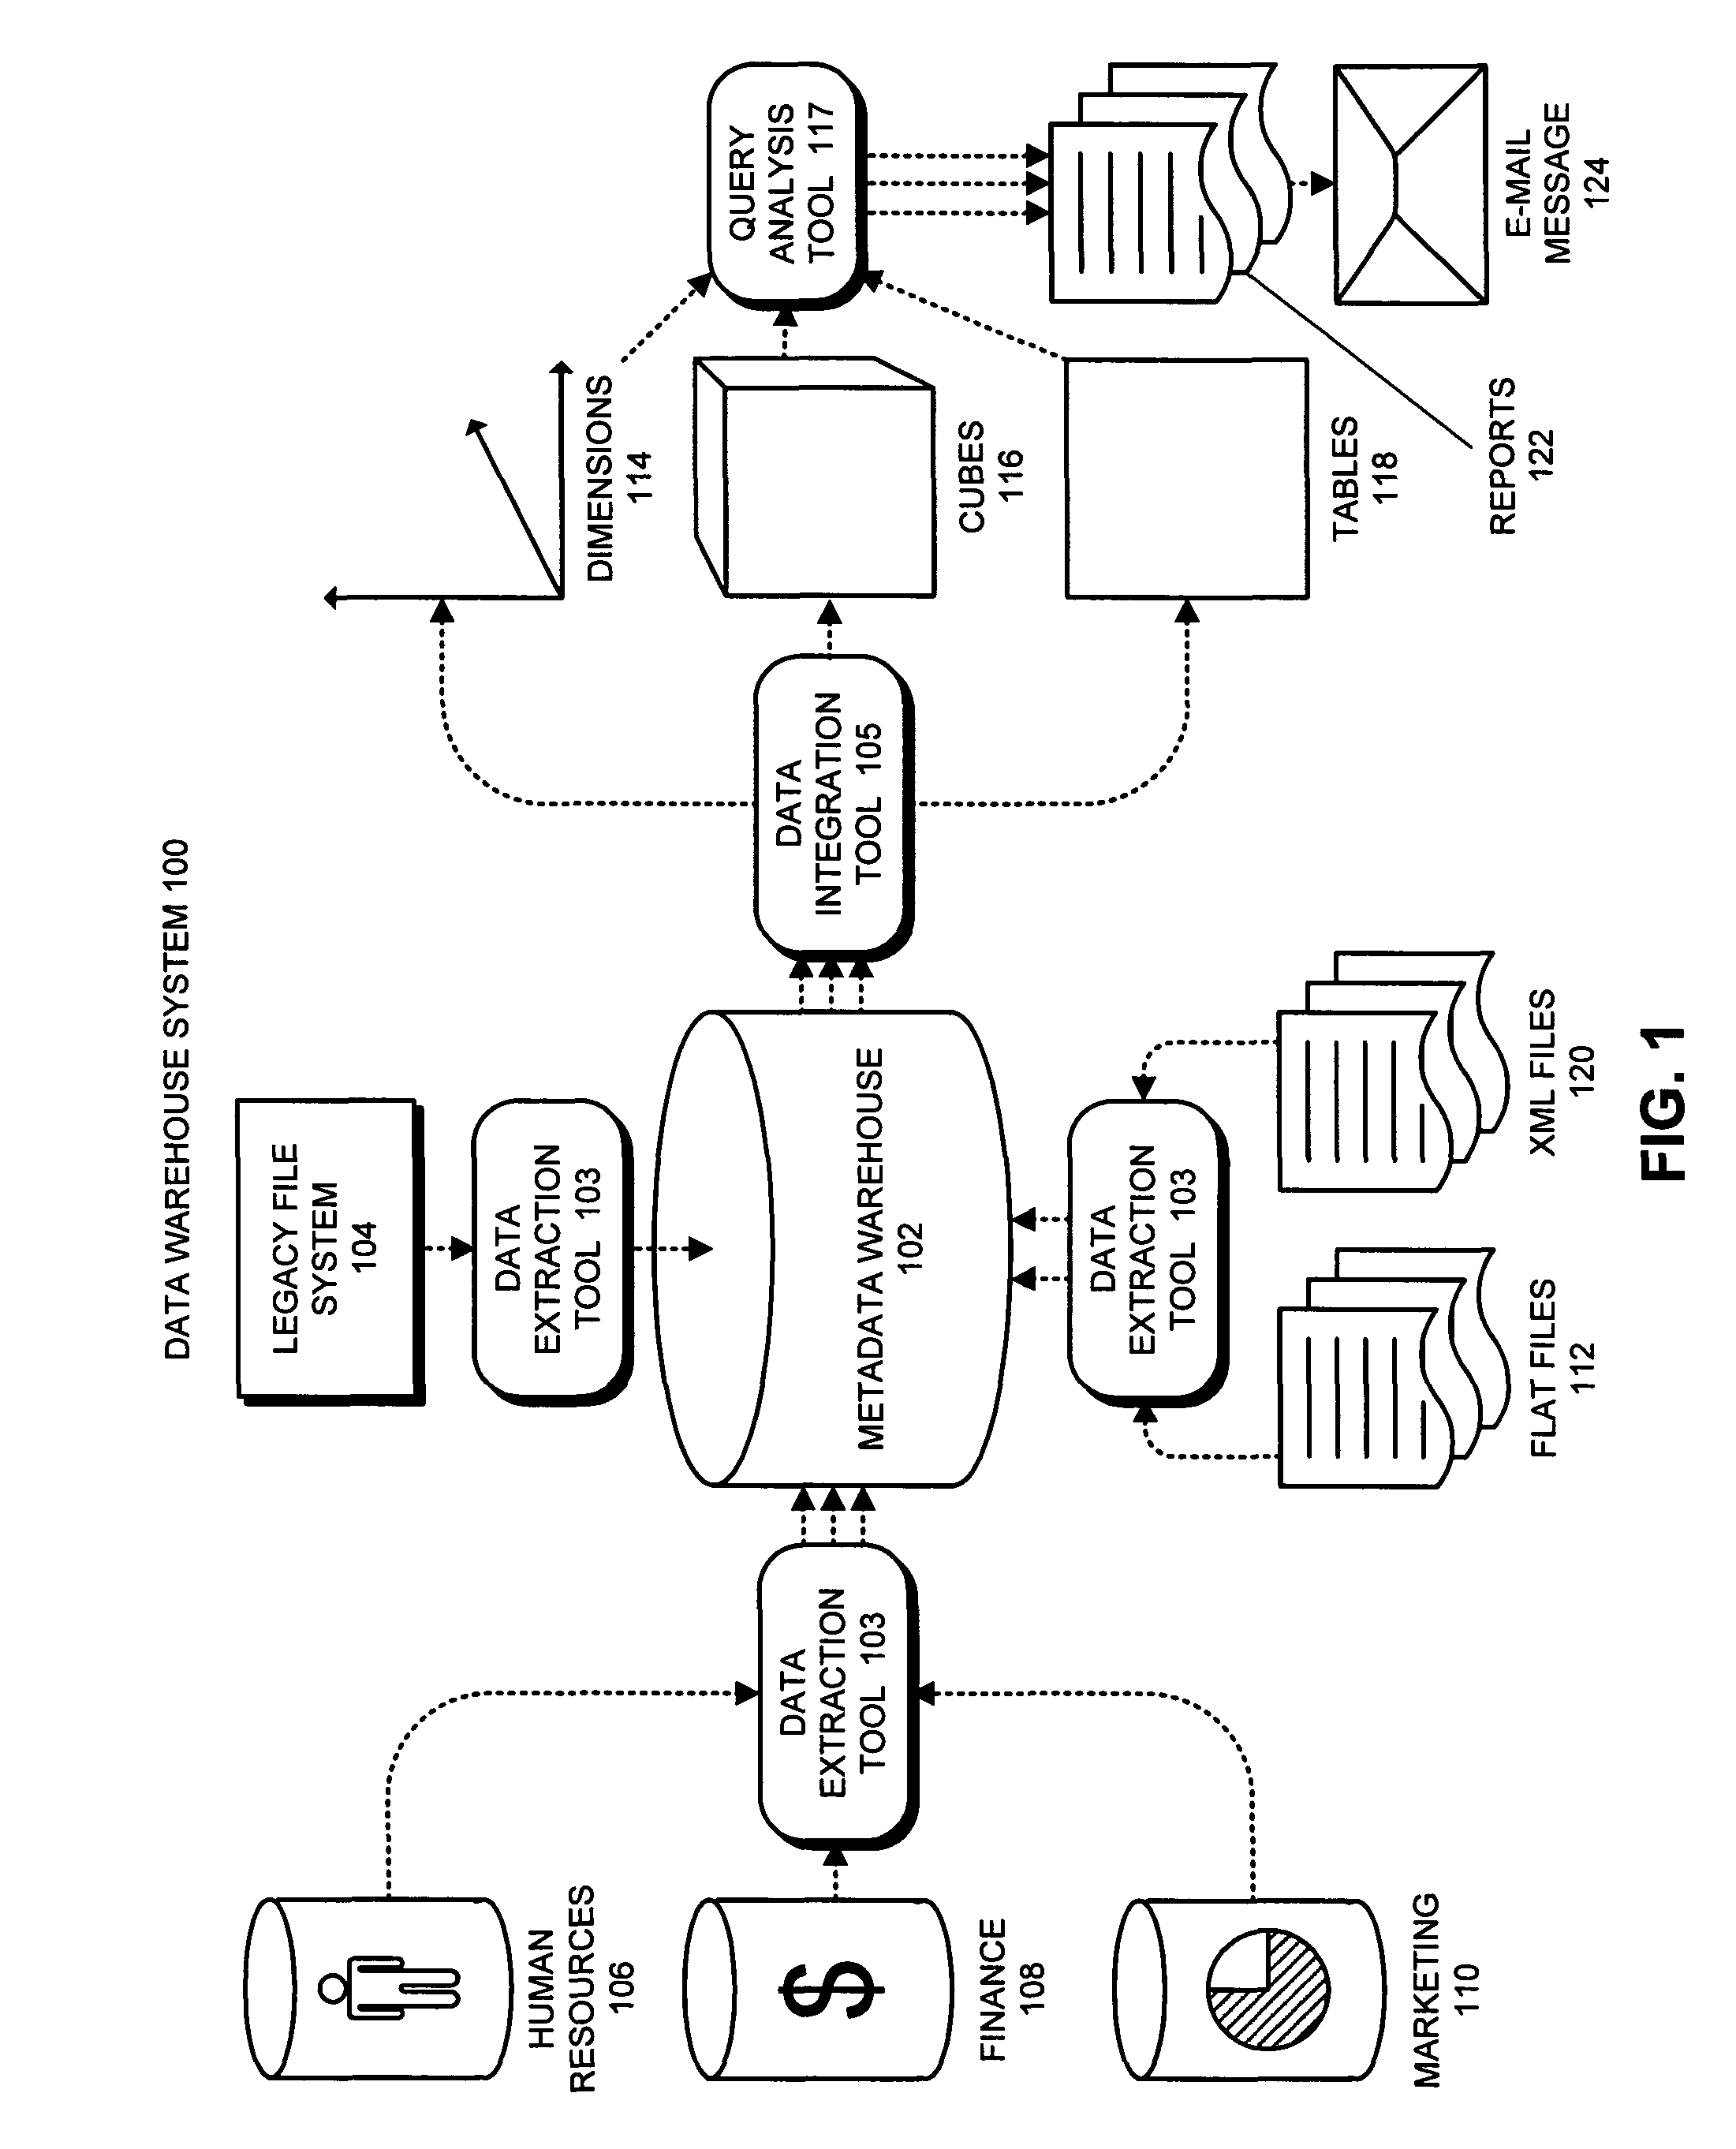 Method and apparatus for facilitating data stewardship for metadata in an ETL and data warehouse system